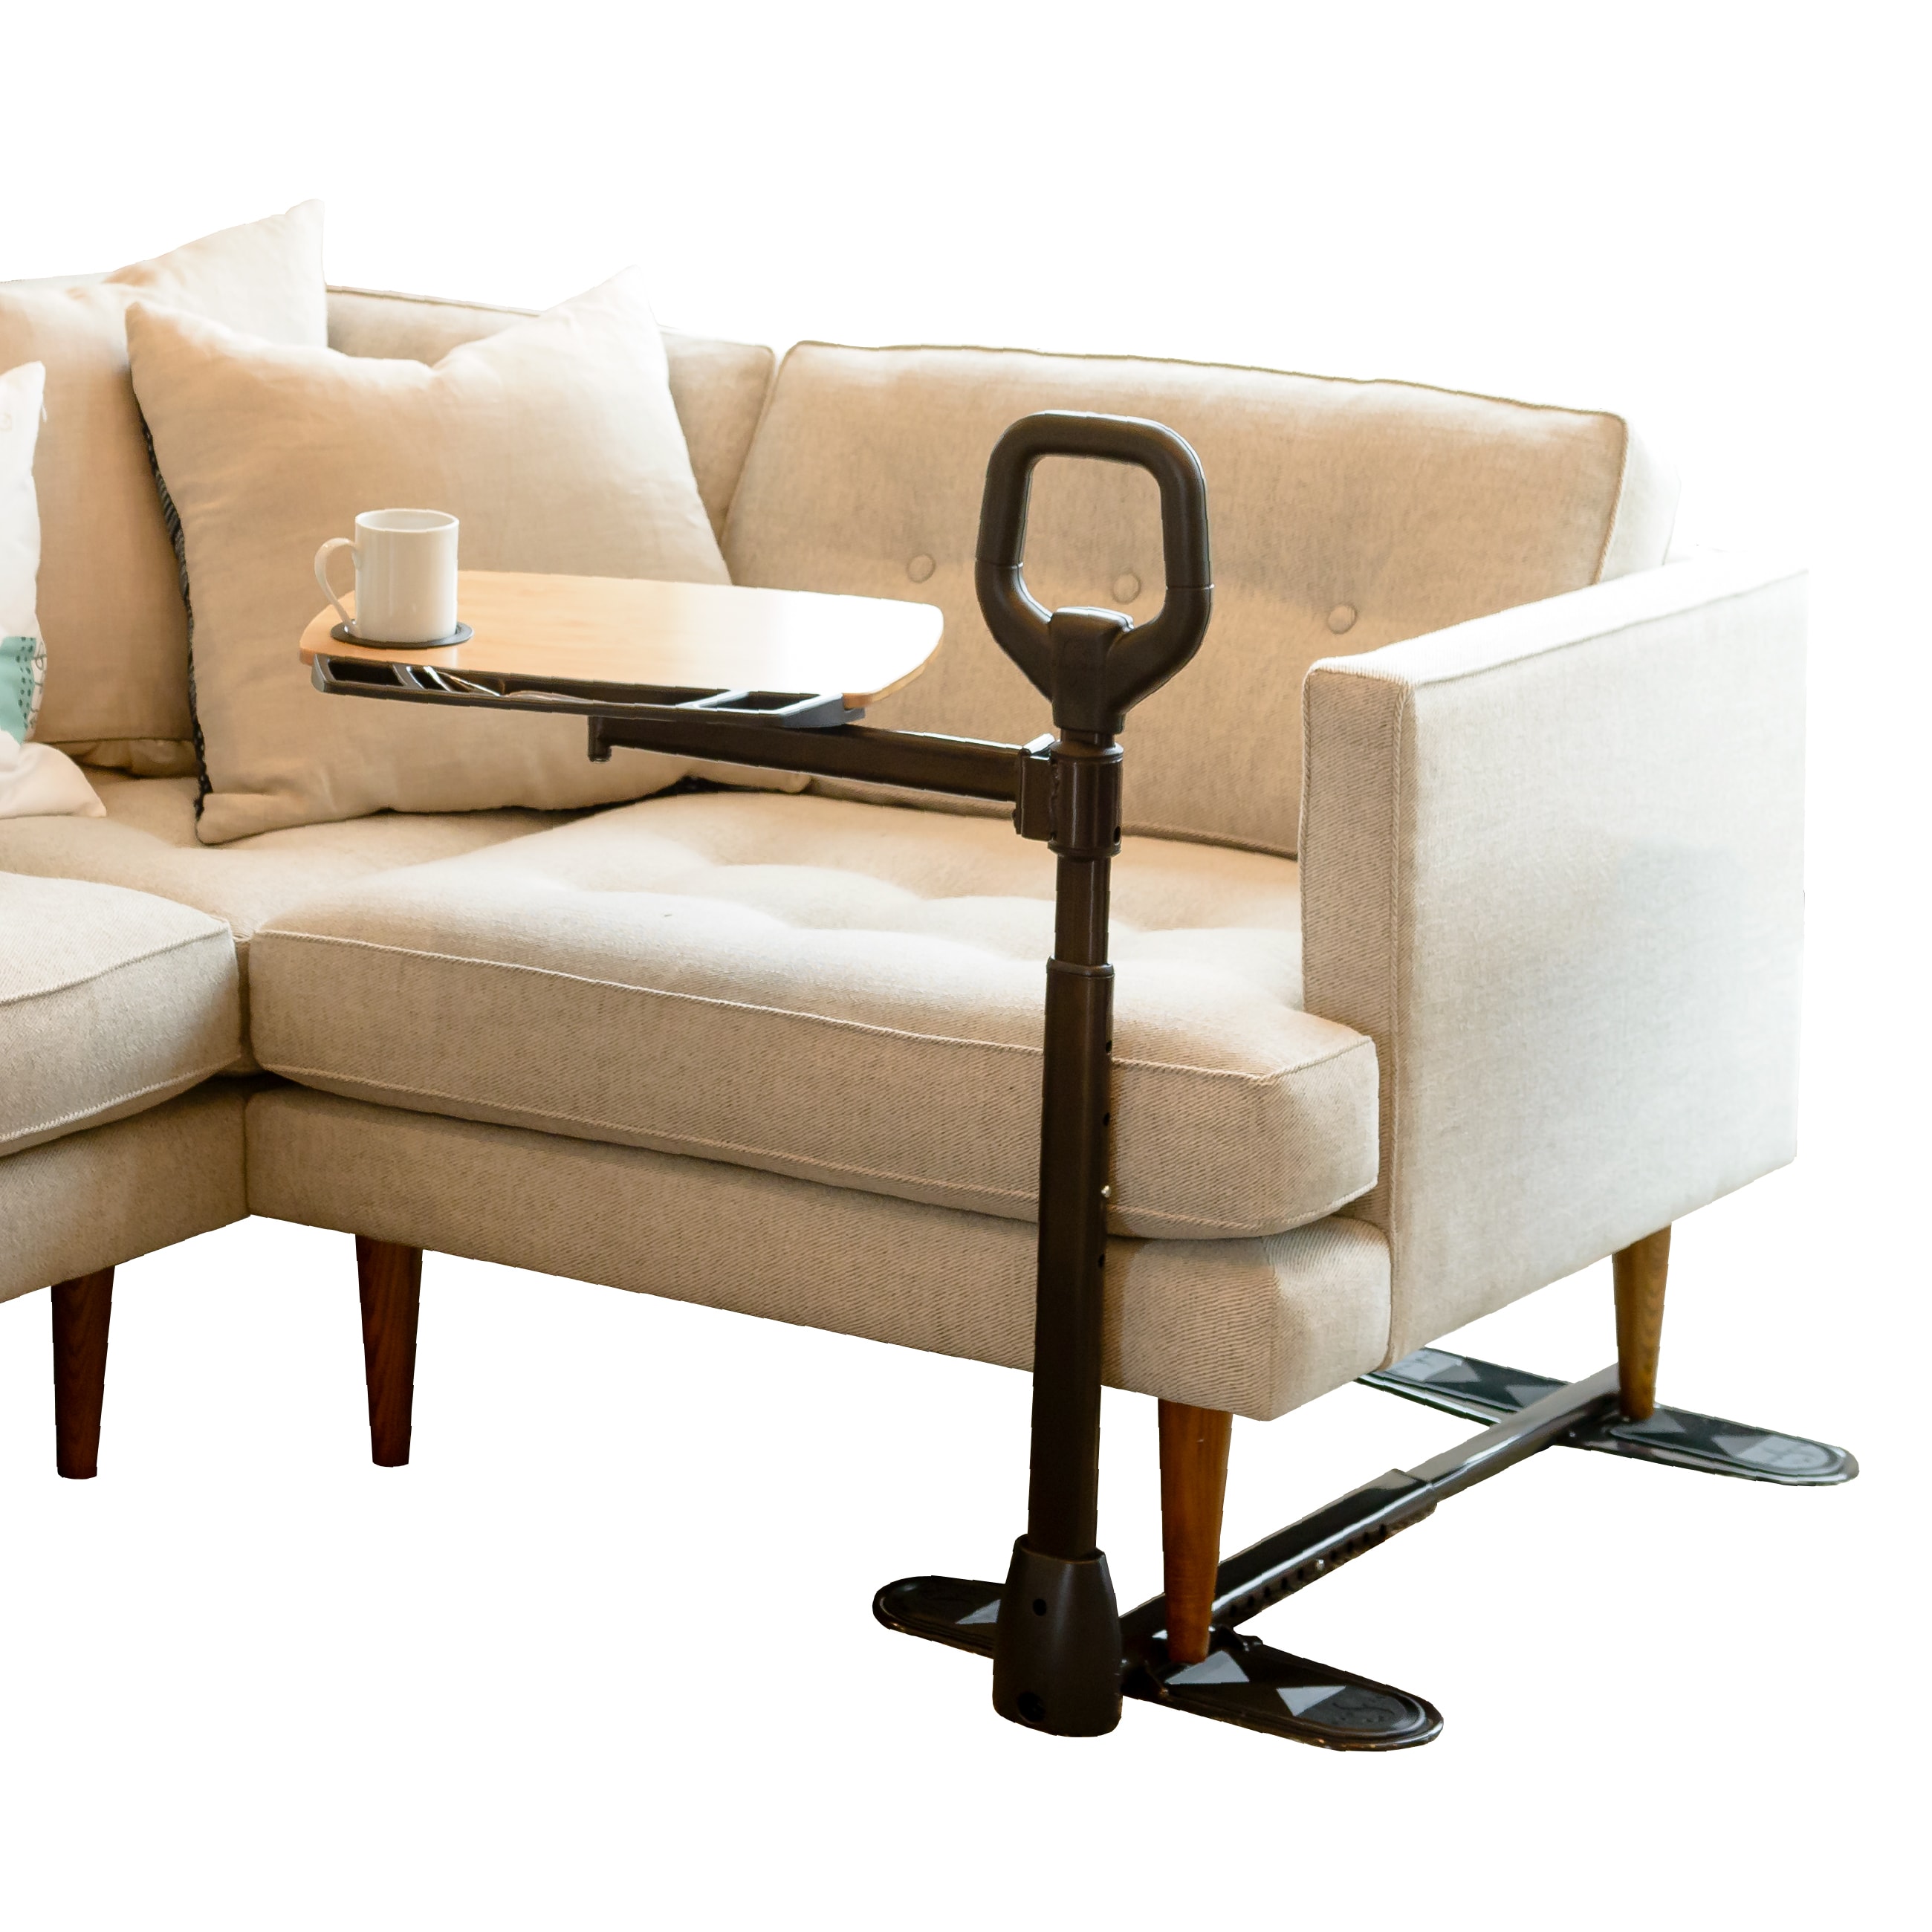 CHAIR/COUCH/BED CANE: Assist IN/OUT SAFELY, ADJUSTABLE, STURDY - household  items - by owner - housewares sale 